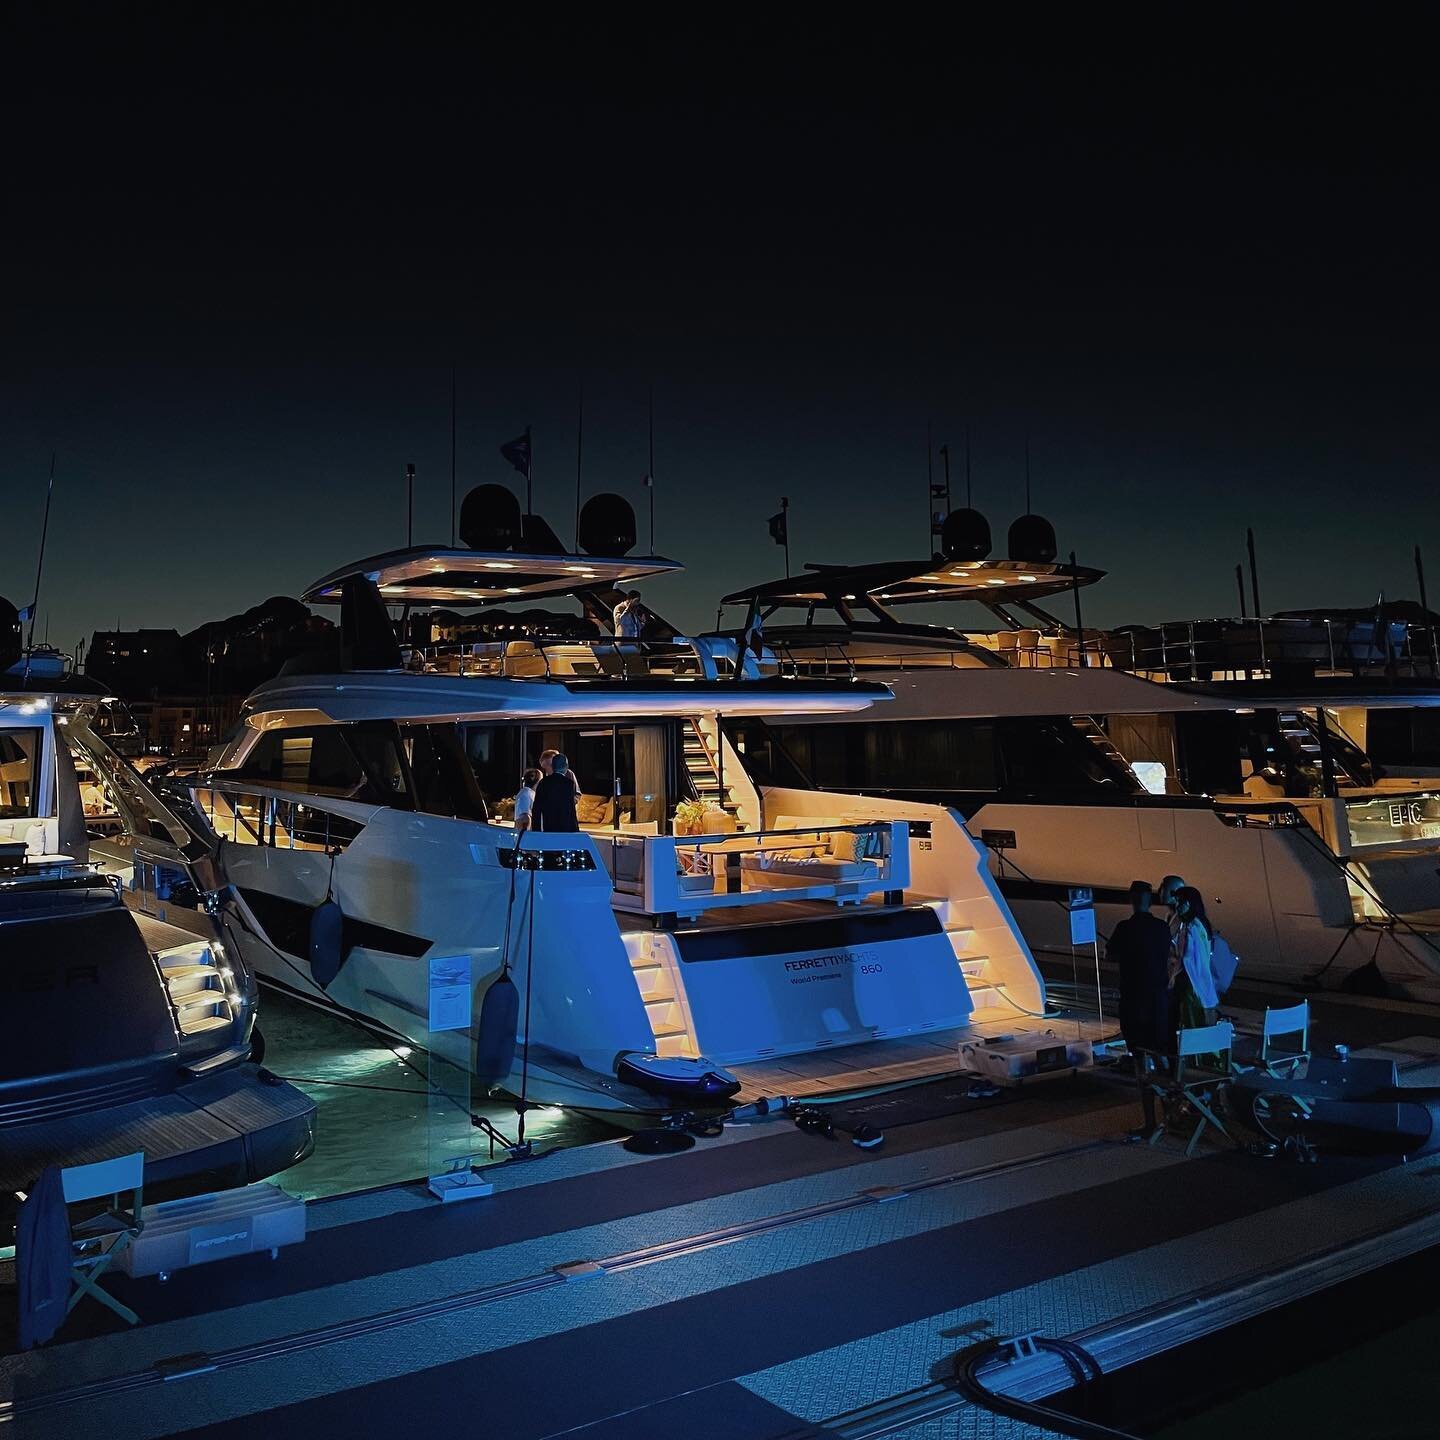 The new @ferrettiyachts Project 860. 

Unmistakable, even at nighttime.